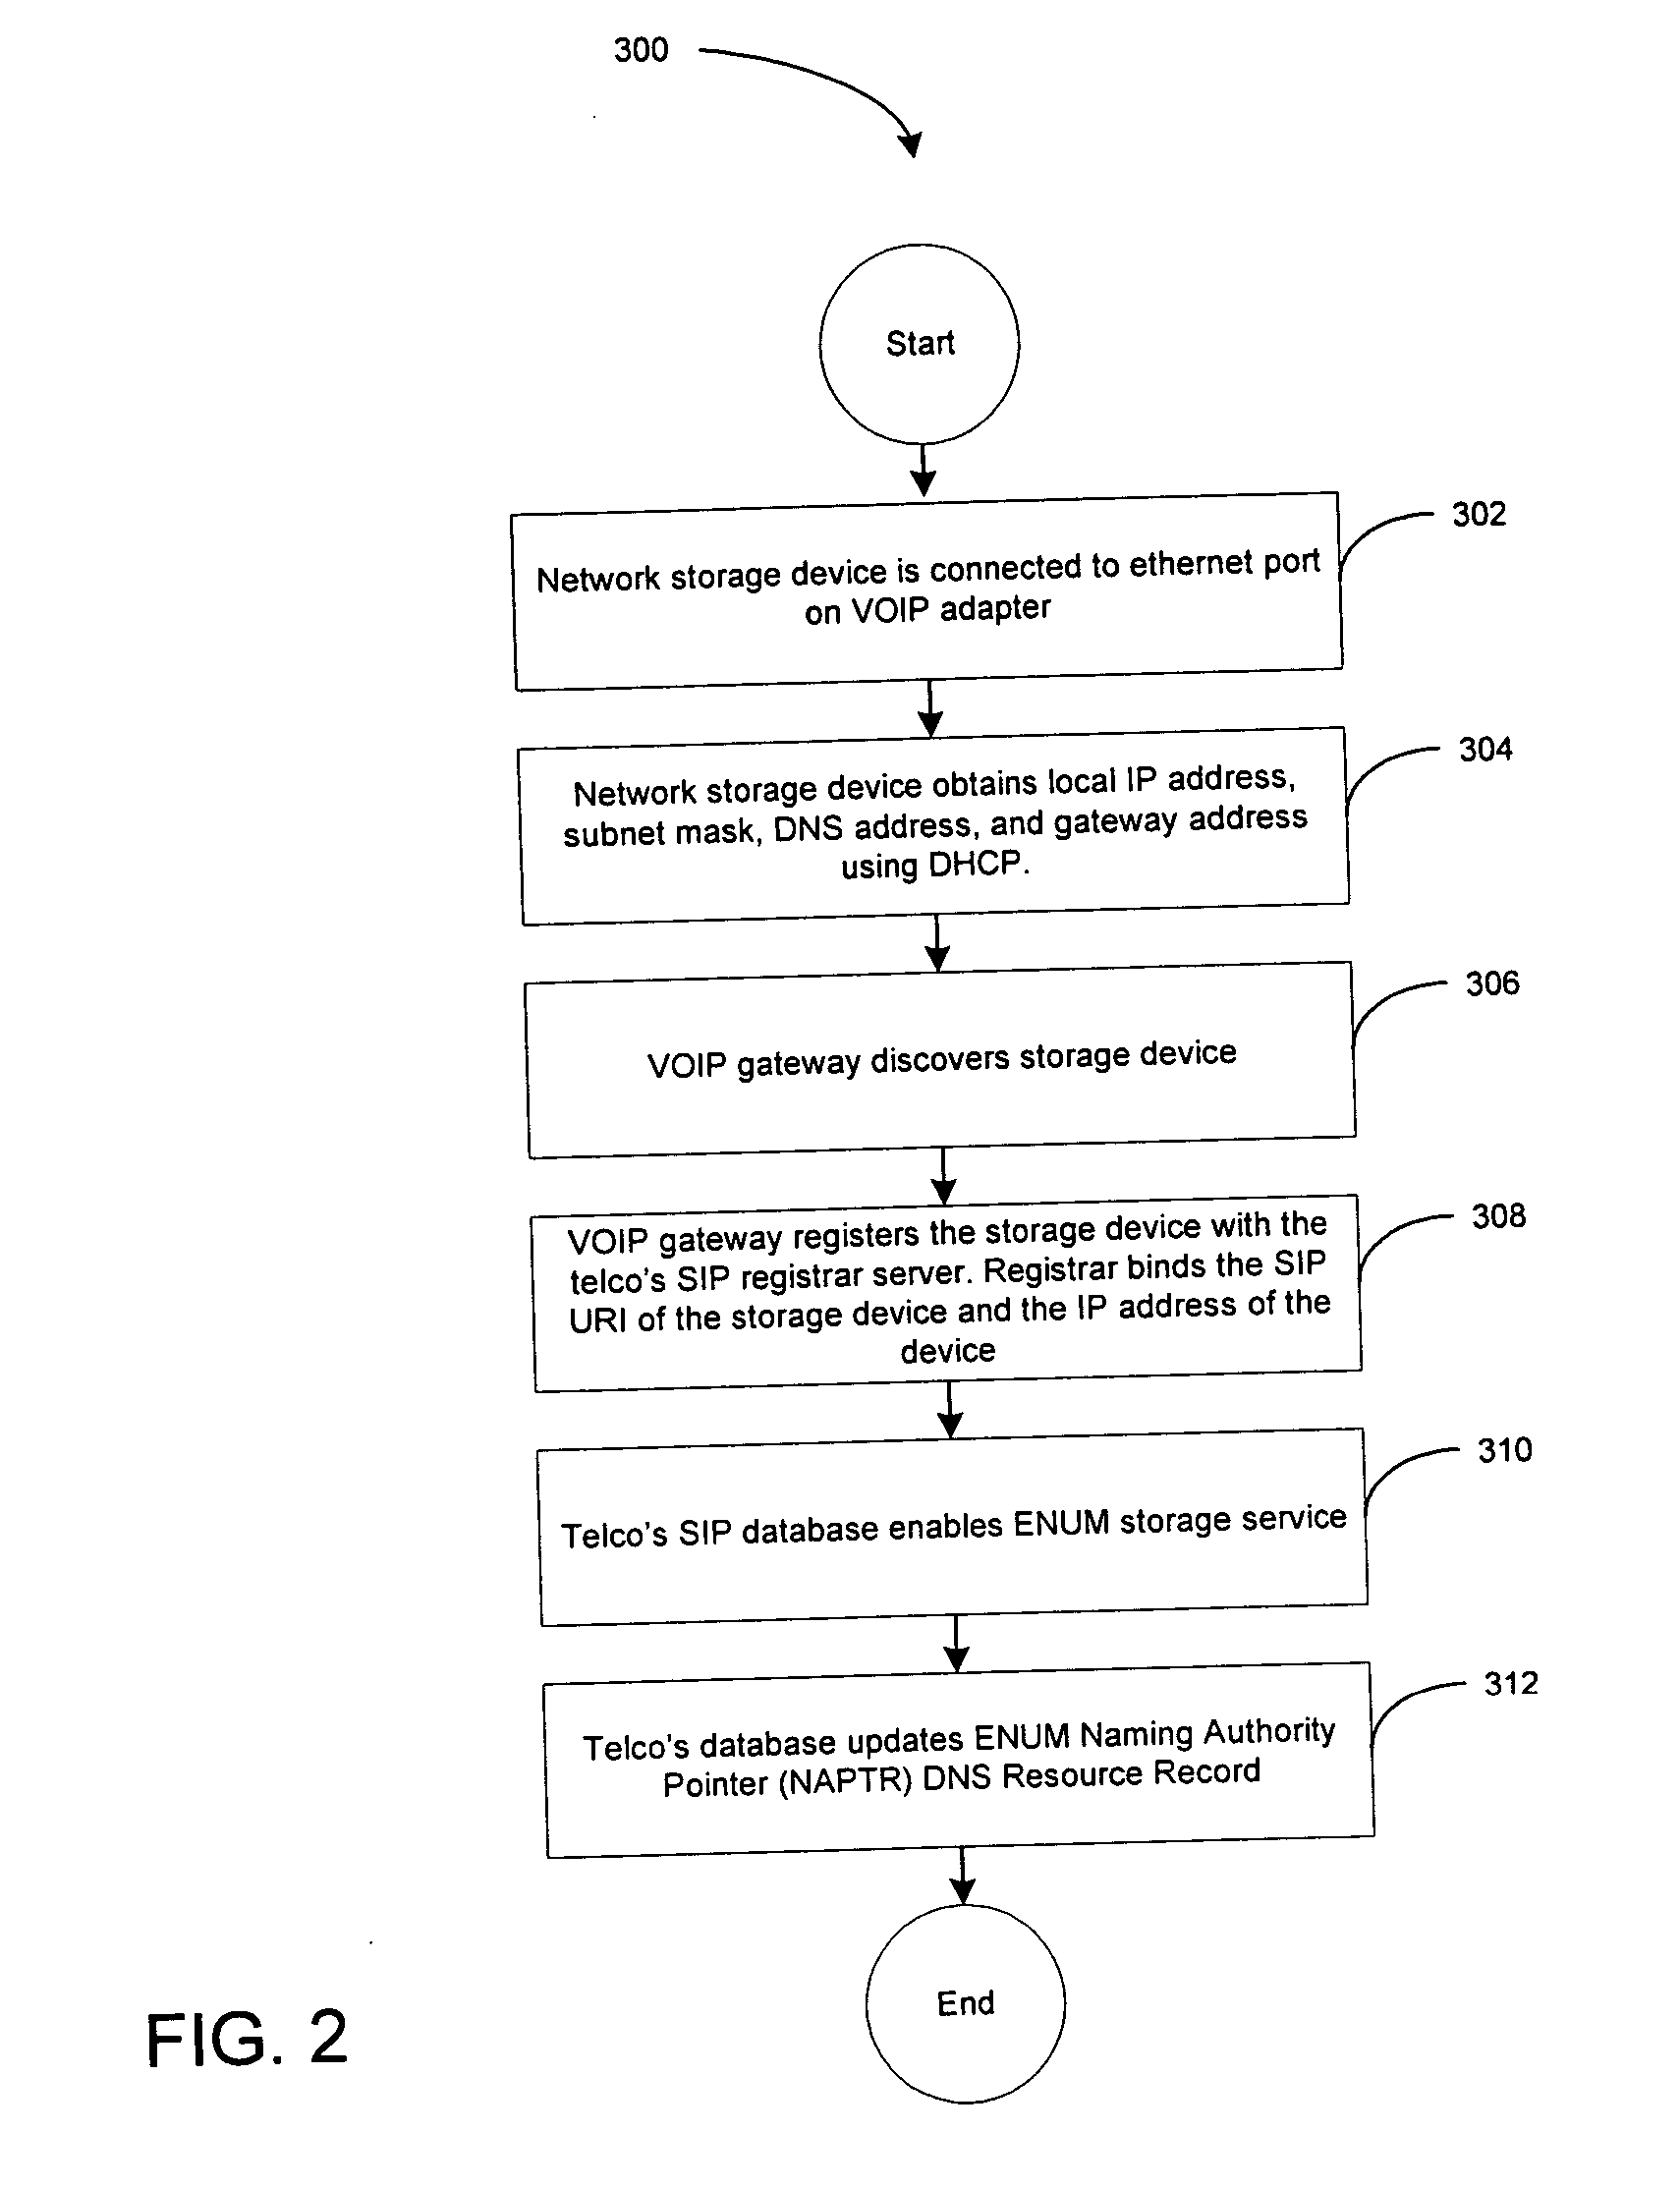 Method and system for accessing a storage or computing device via the Internet